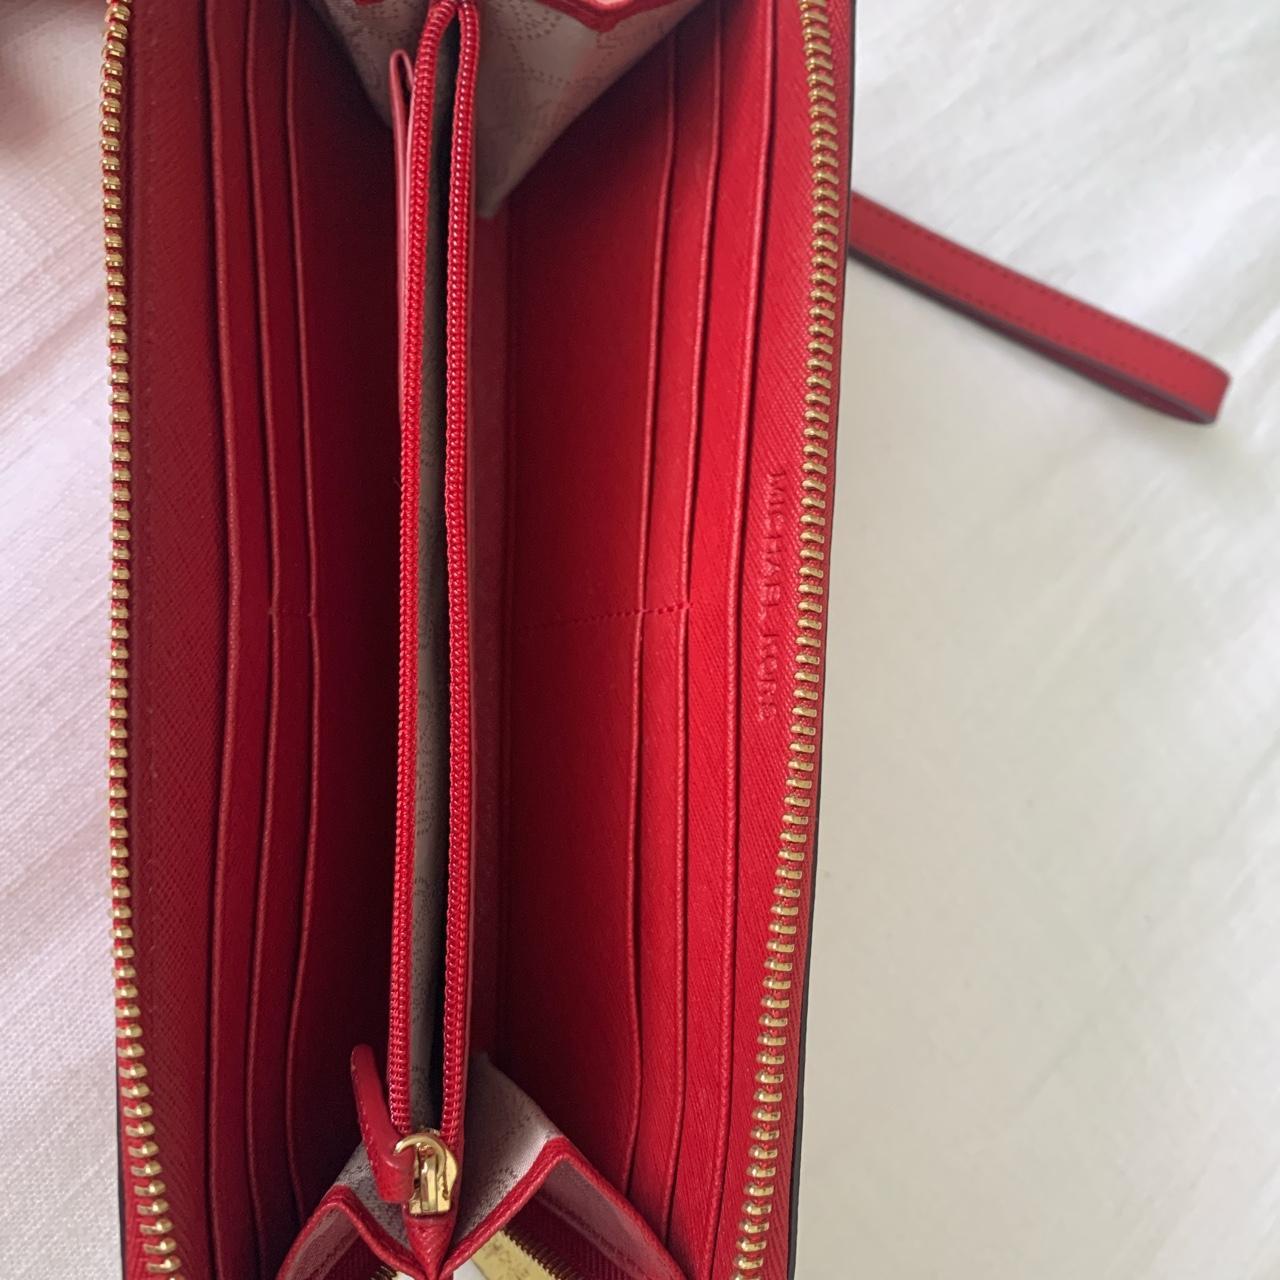 Red micheal kors wallet with wristlet with gold - Depop